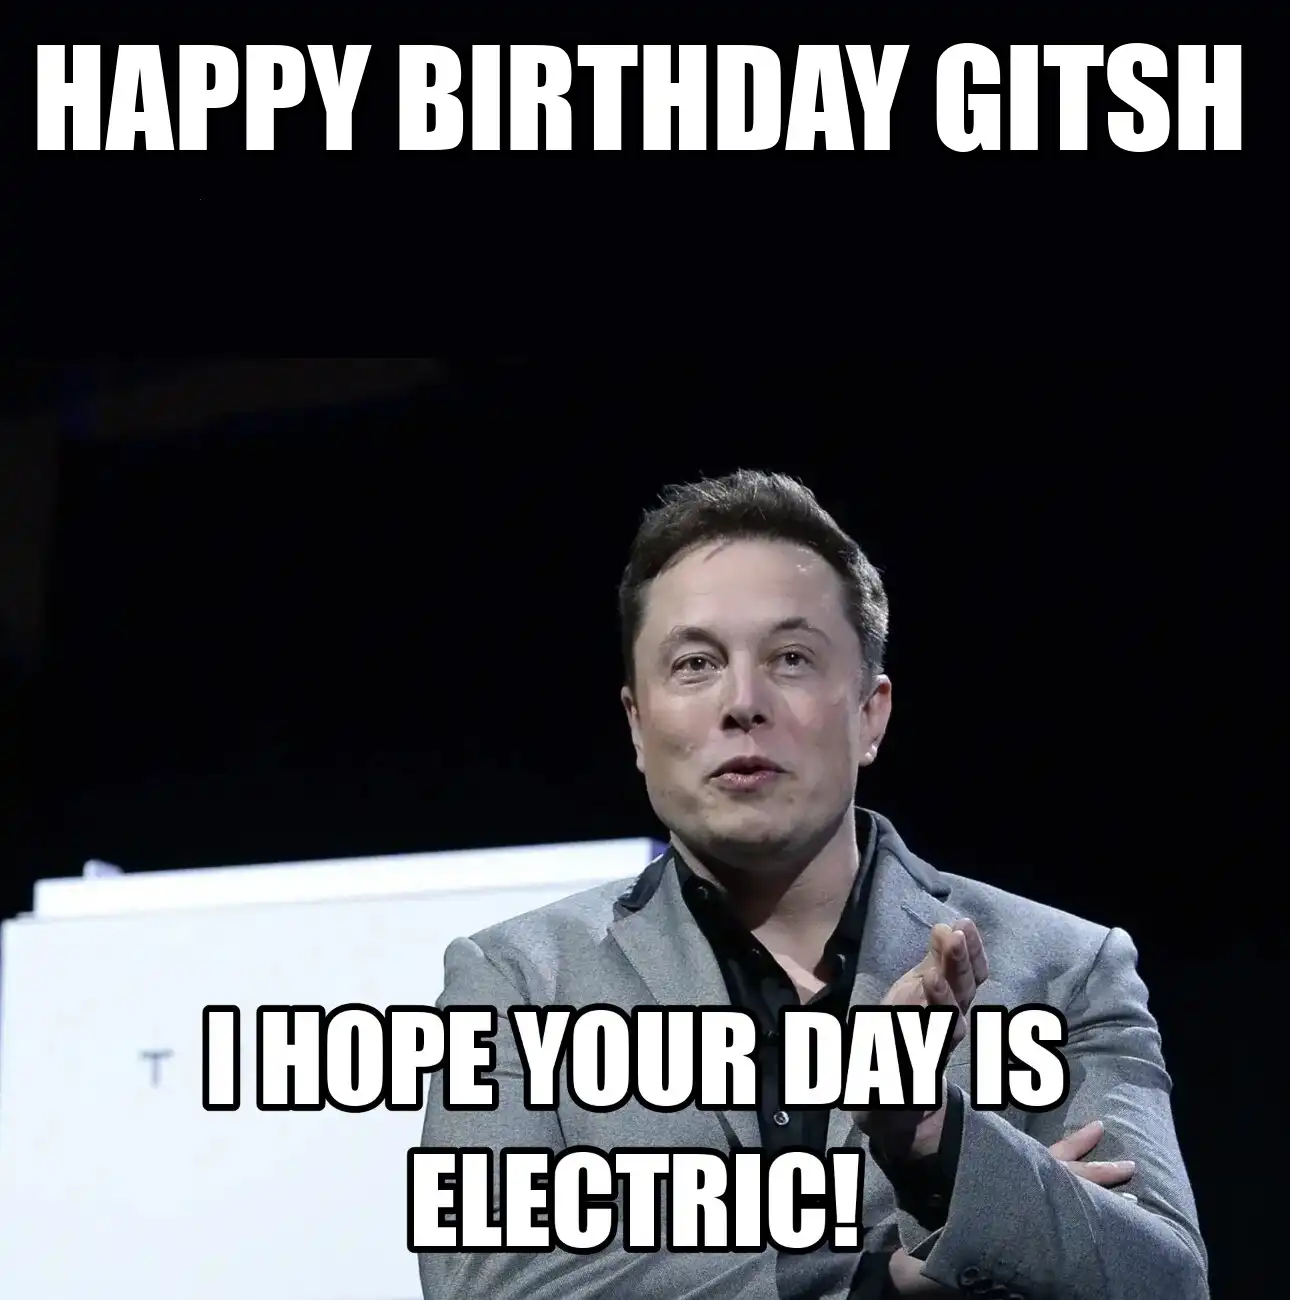 Happy Birthday Gitsh I Hope Your Day Is Electric Meme